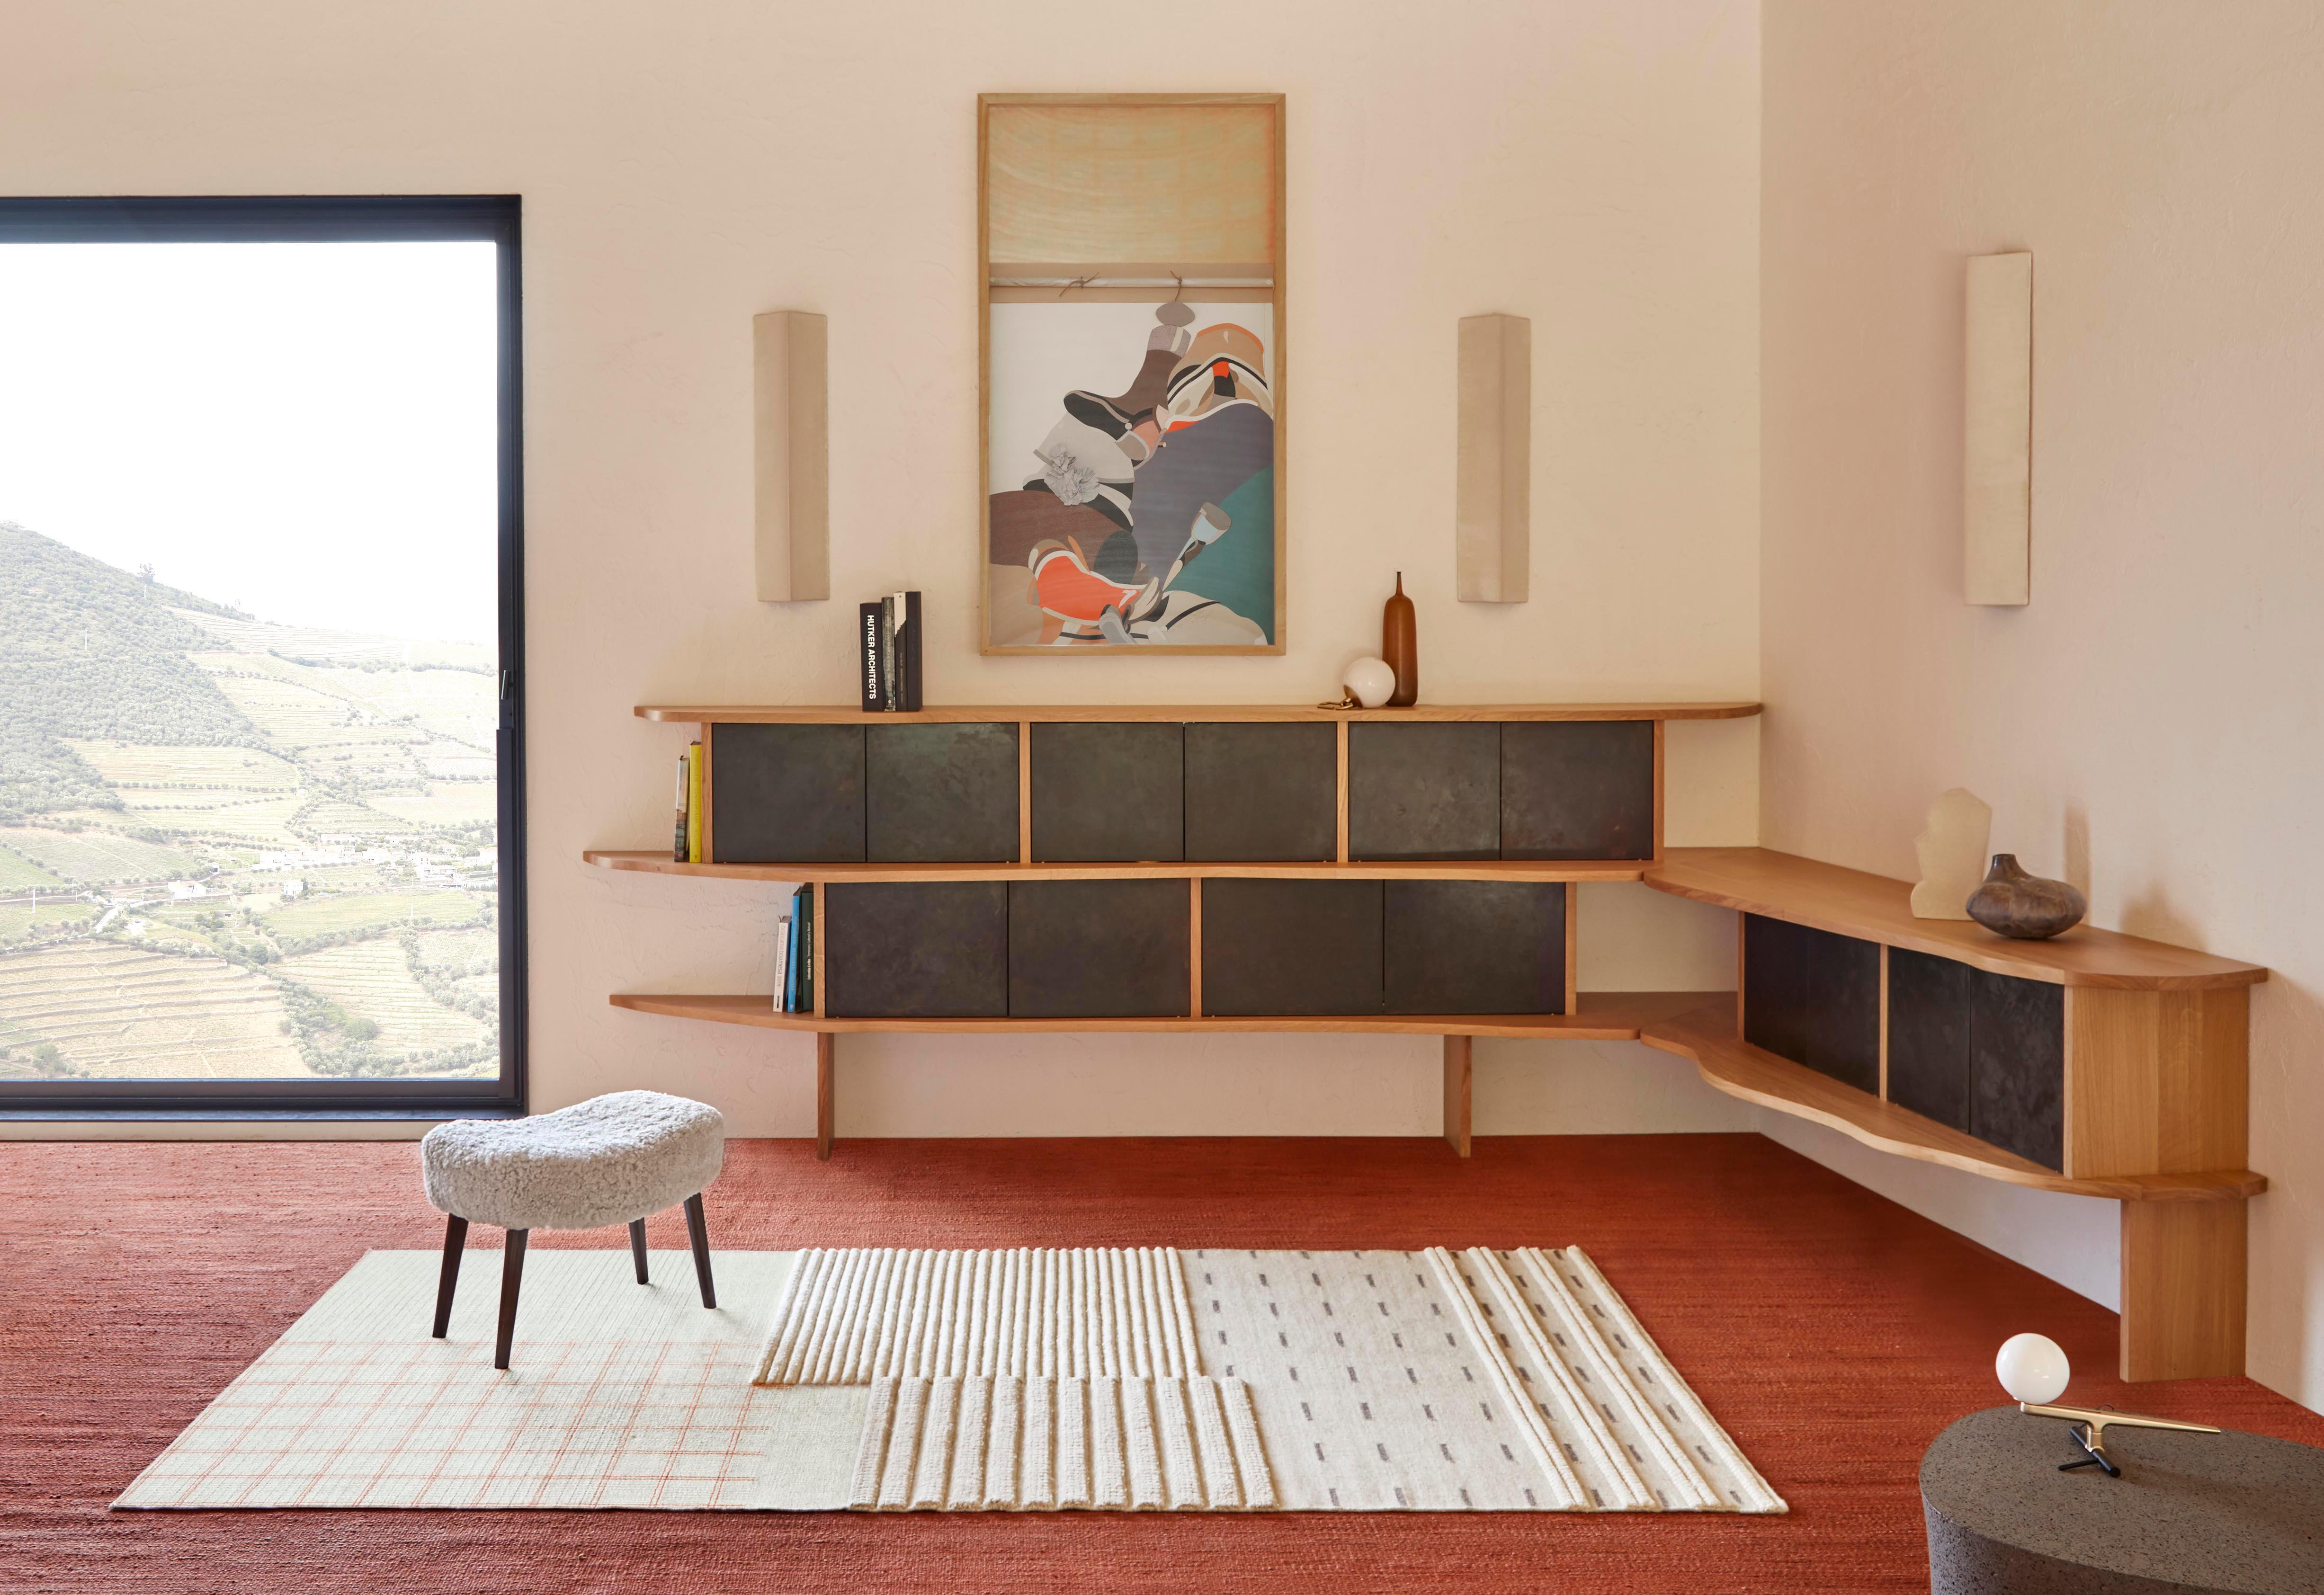 “Neri&Hu questions the sofa typology. Once the normal typology of a piece of furniture is broken down into its components, seating and rug become a single space.

The back component draws from the origins of GAN as a textile brand, by referencing